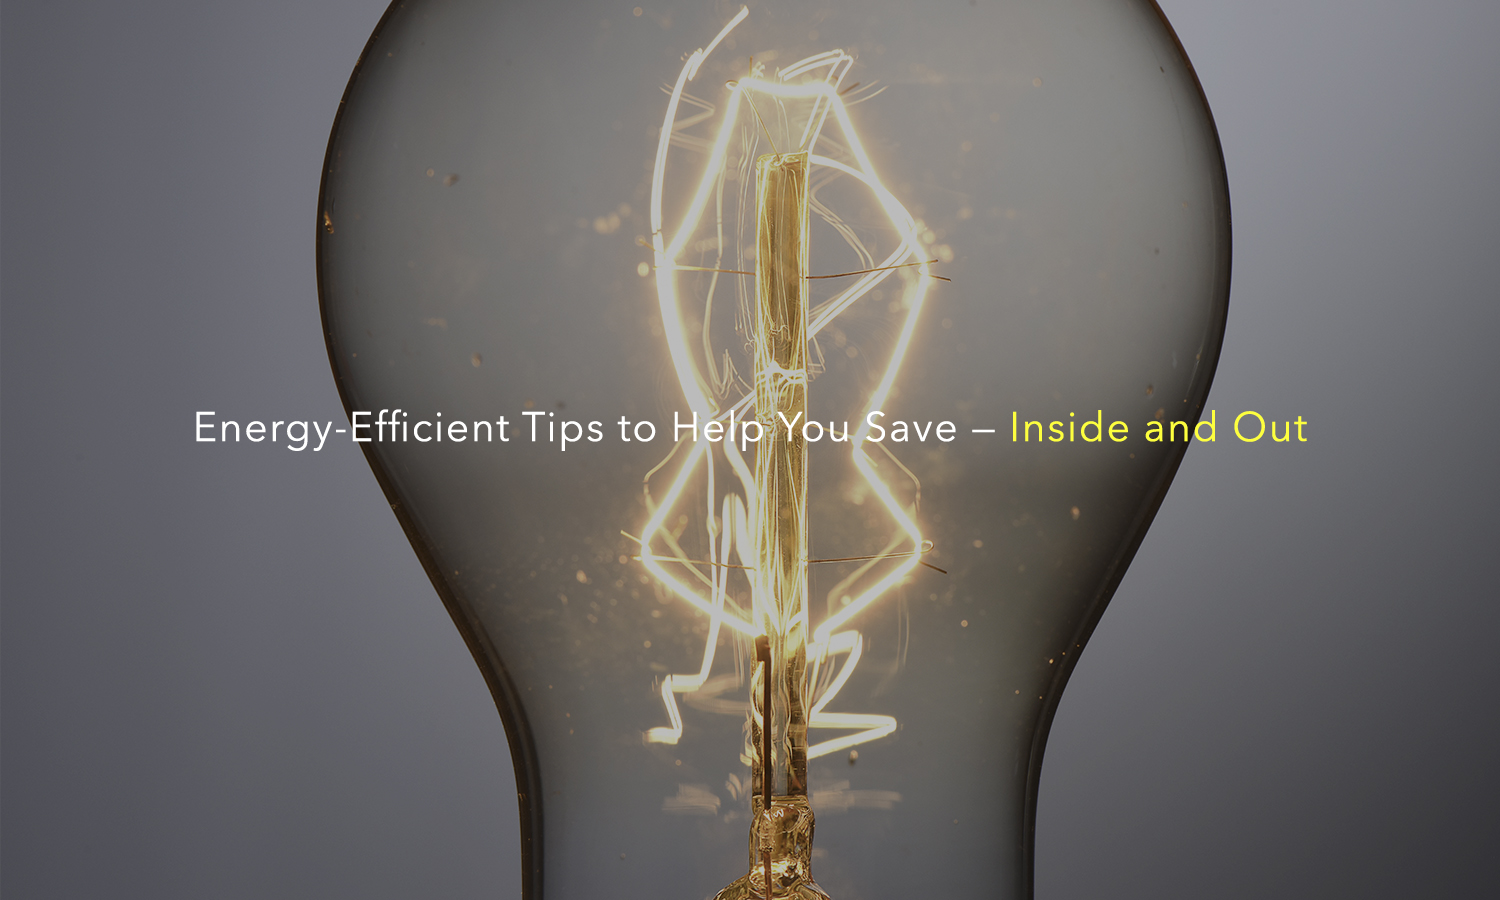 energy-efficient tips to help you save - inside and out